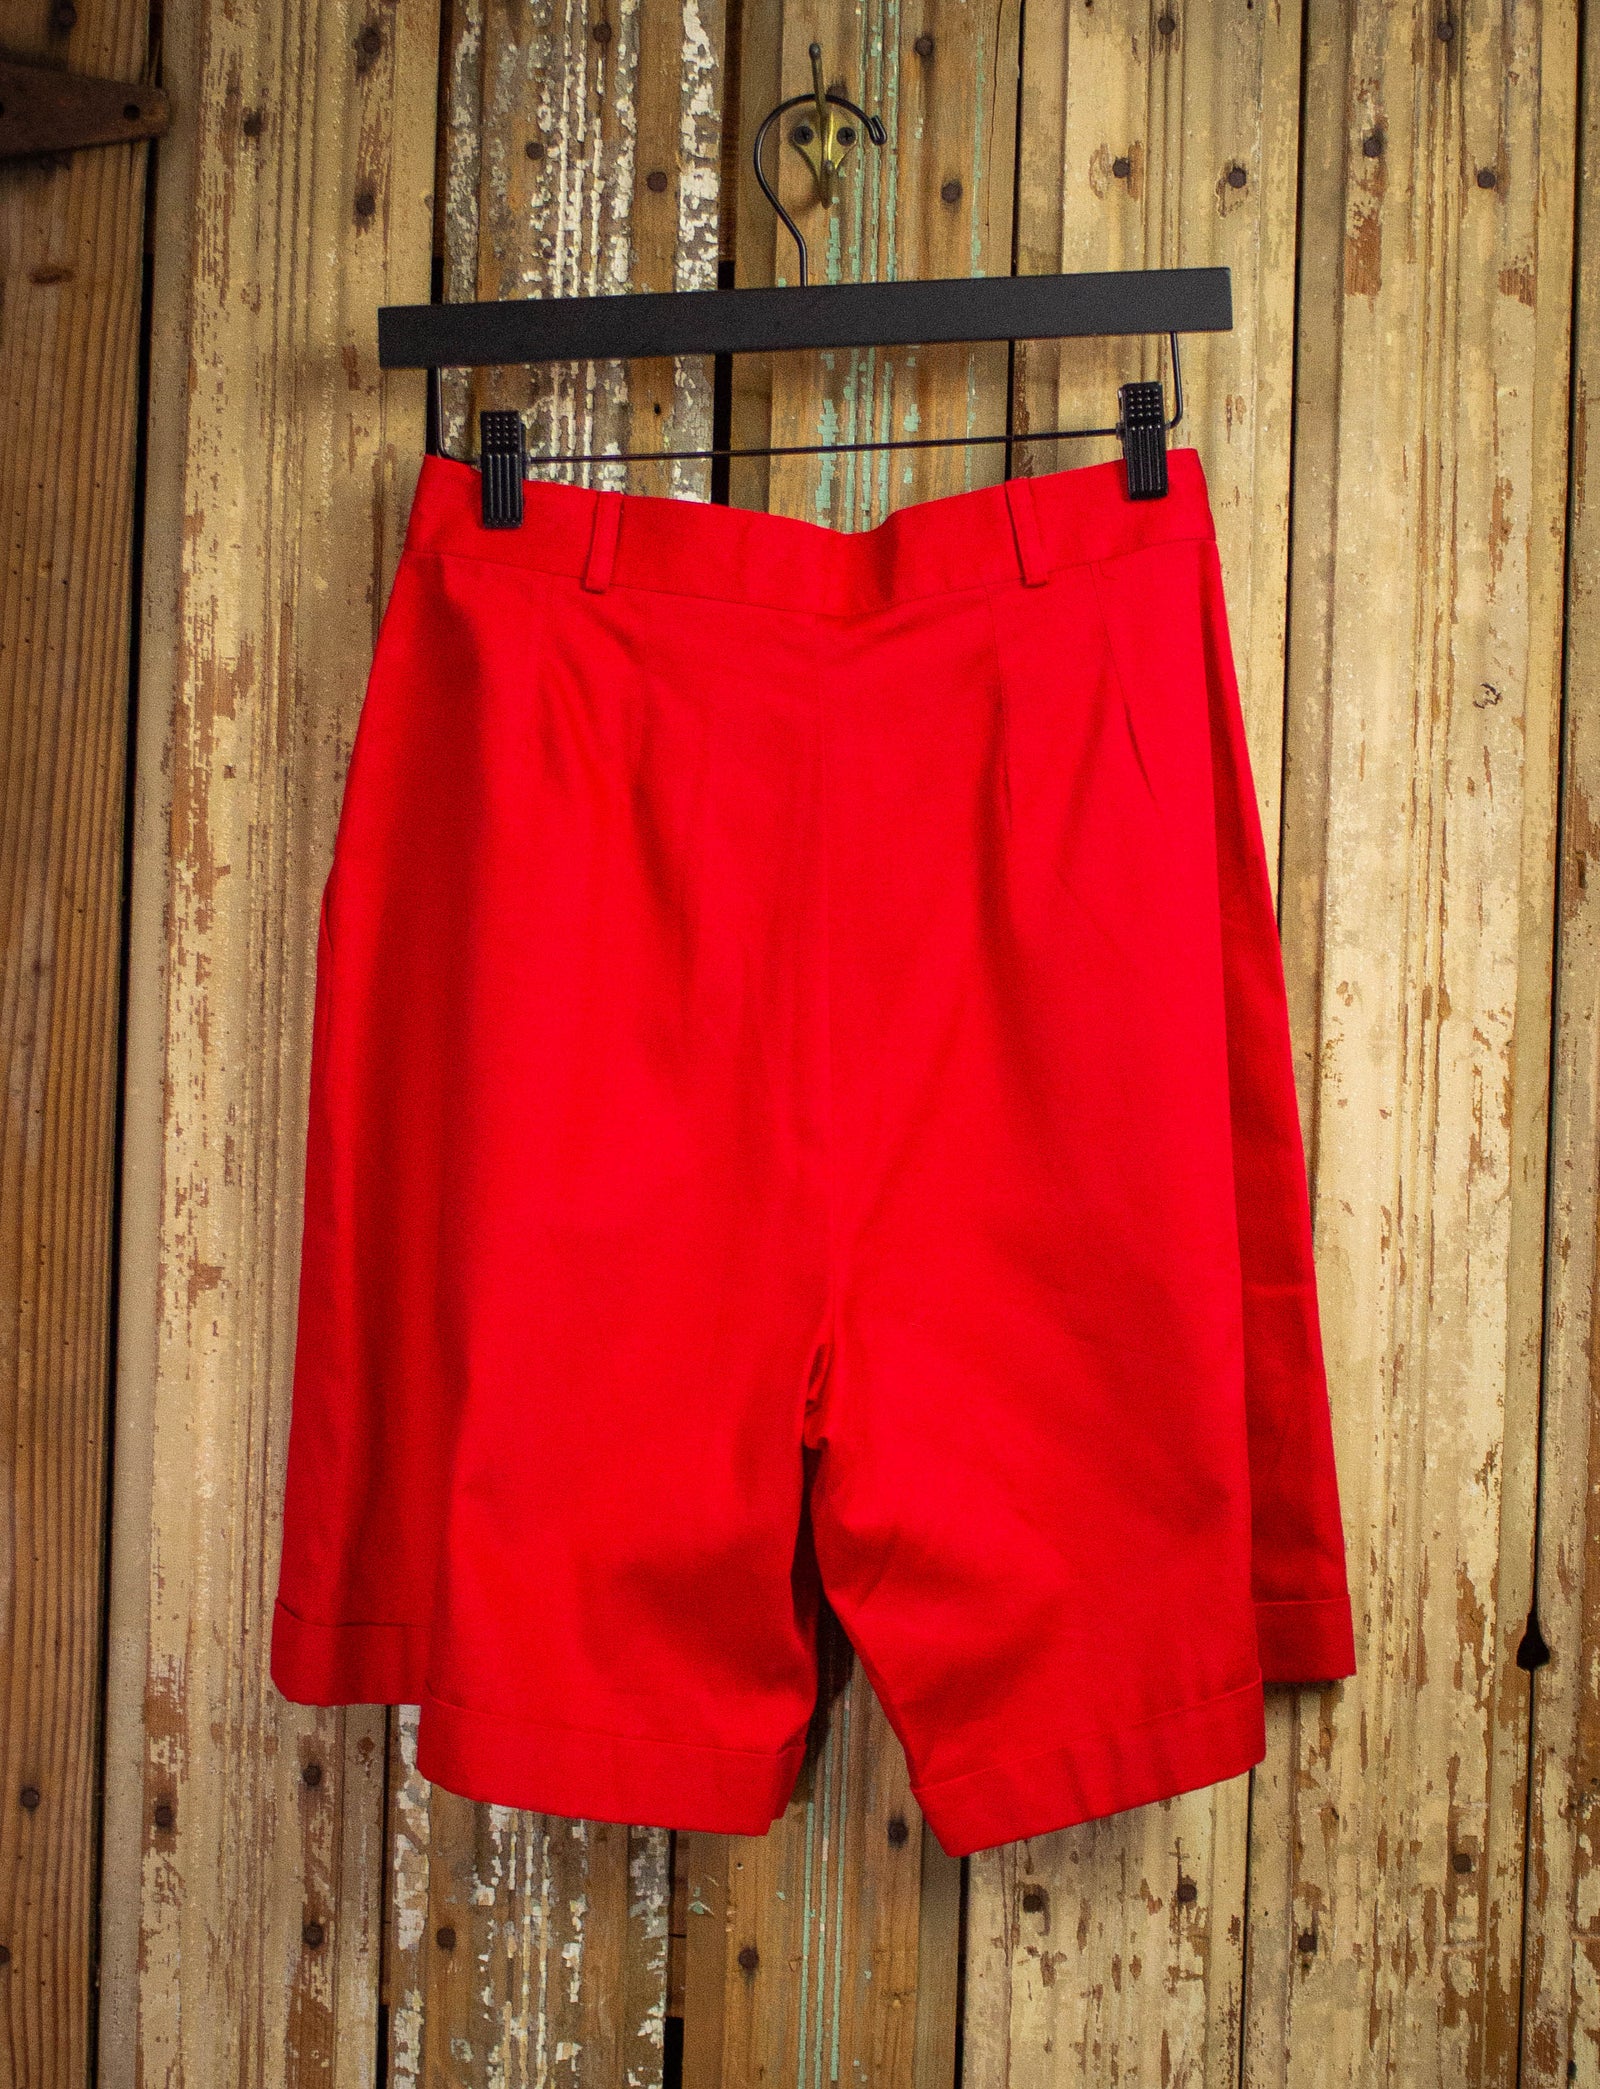 Vintage Como Deadstock Red Shorts 90s 27w